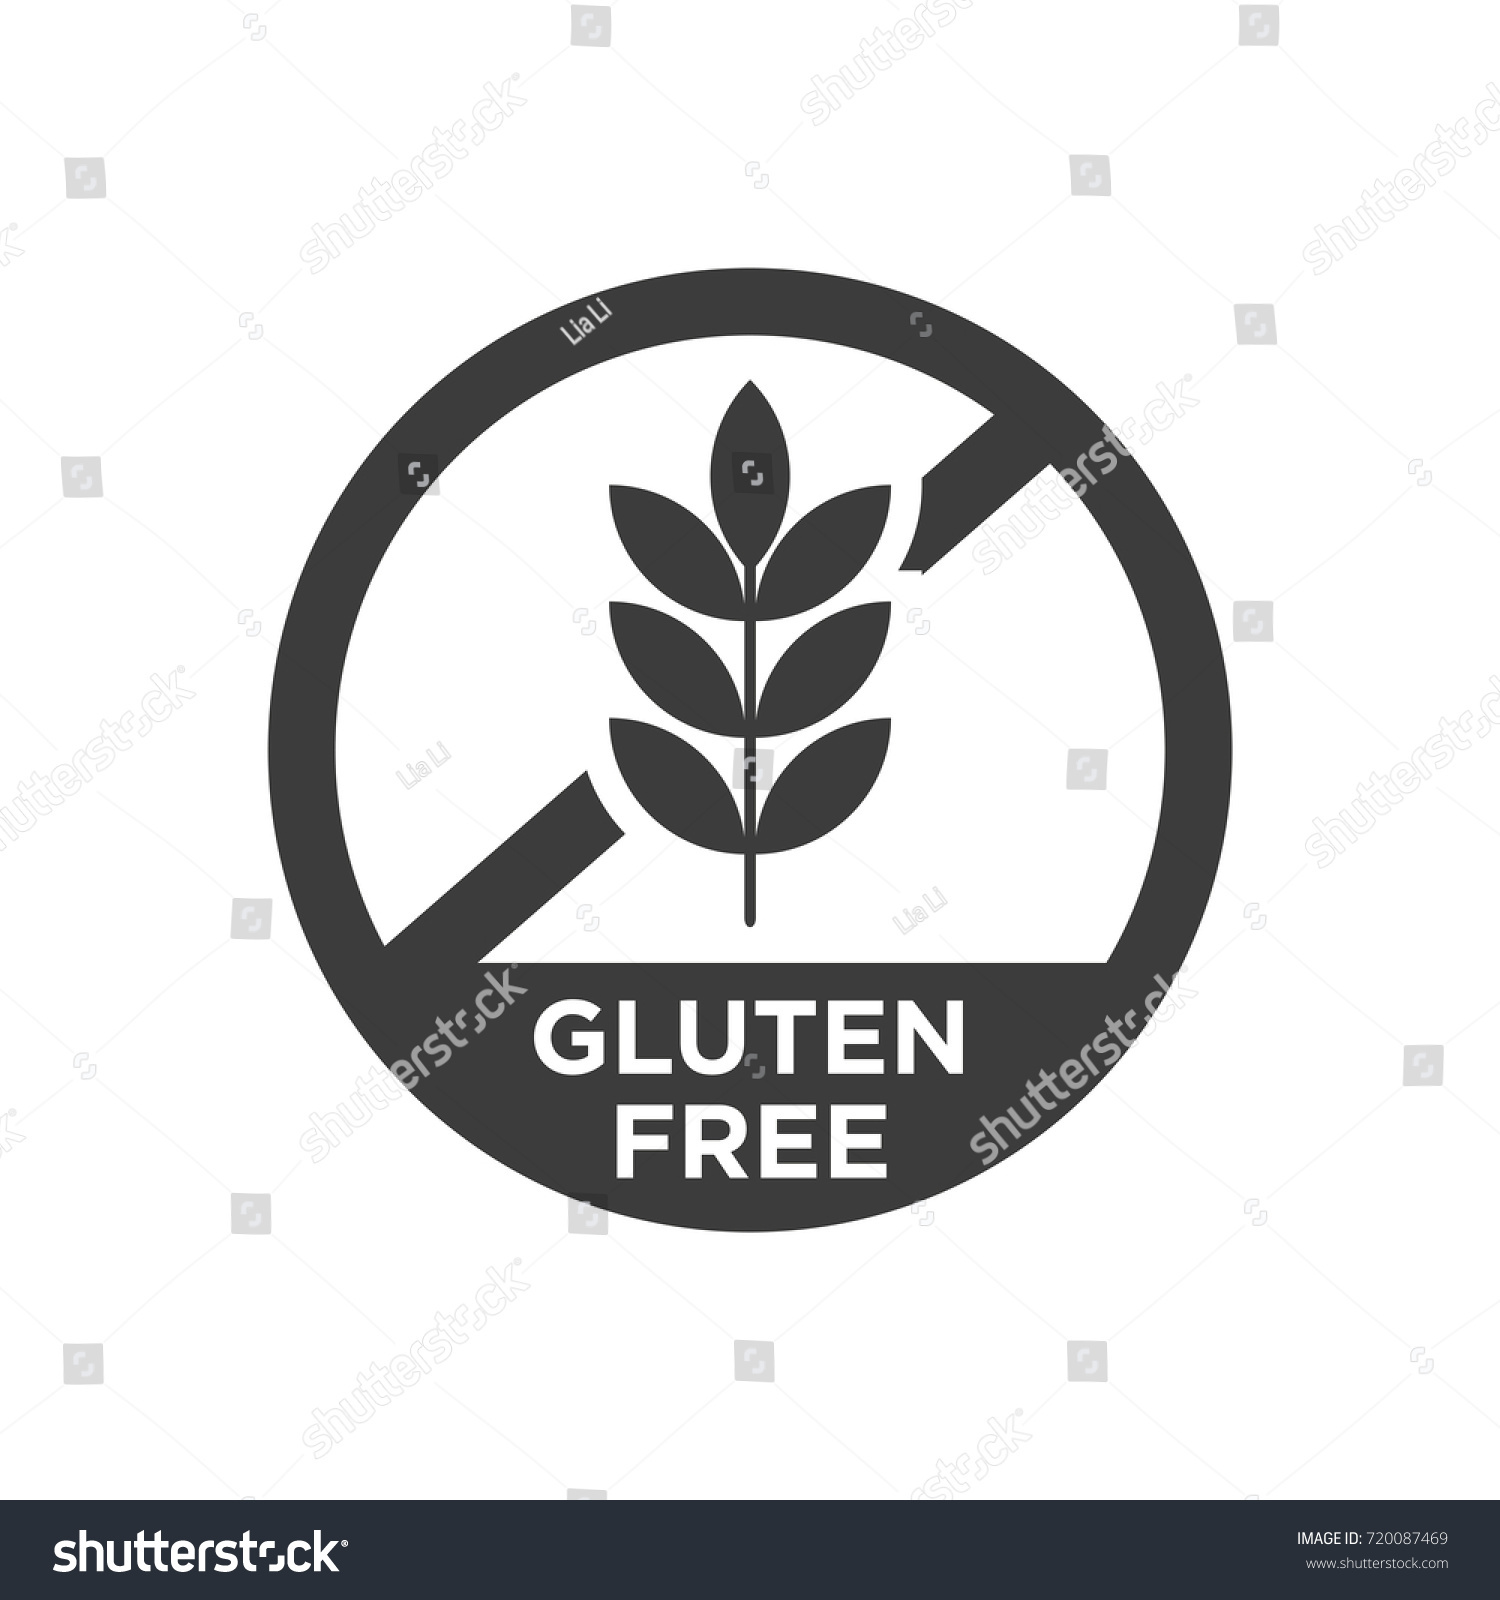 Gluten free icon vector Stock image and royalty-free vector files 